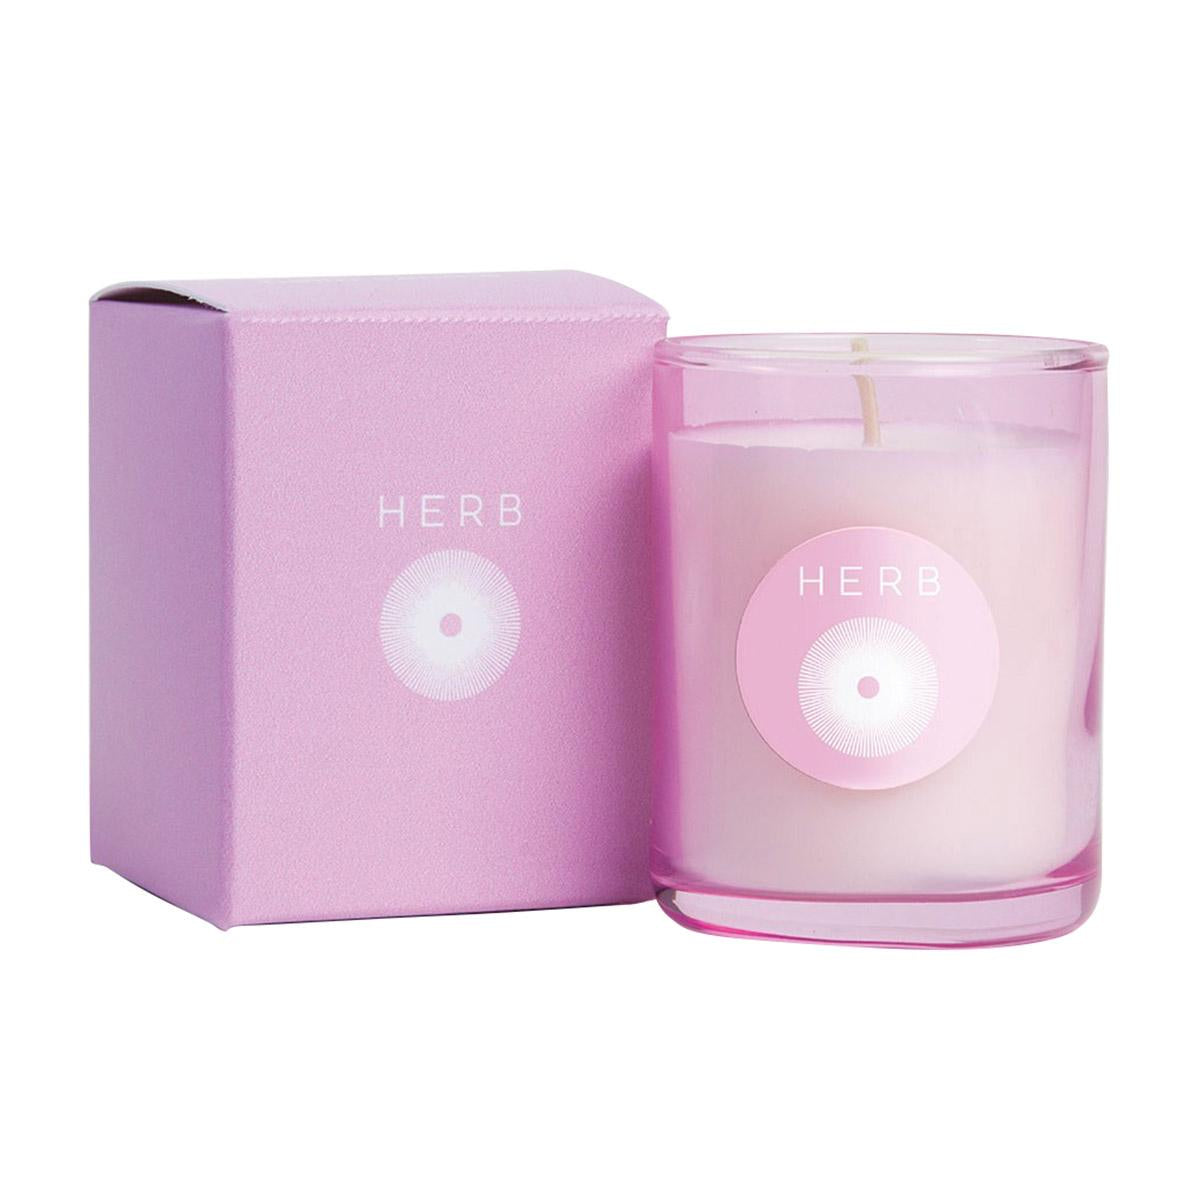 Primary image of Hall? Kerti Angelica Herb Candle